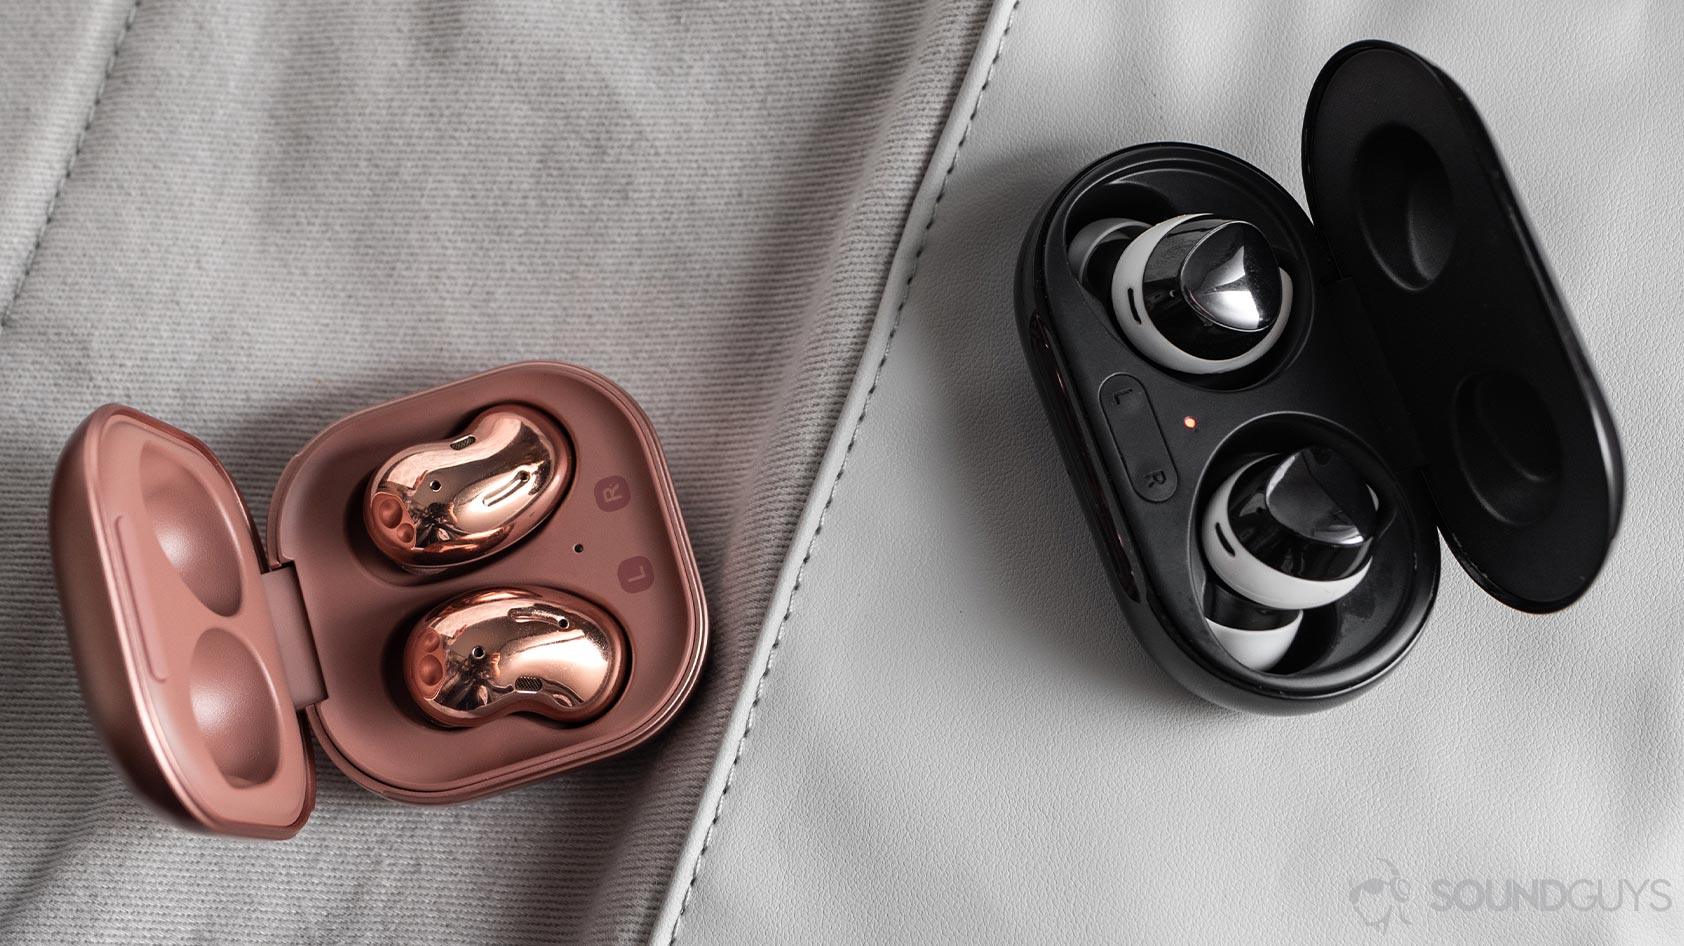 A picture of the Samsung Galaxy Buds Live noise canceling true wireless earbuds in the open case next to the Samsung Galaxy Buds Plus for the Samsung Galaxy Buds Plus vs Samsung Galaxy Buds Live comparison.for the Samsung Galaxy Buds Plus vs Samsung Galaxy Buds Live comparison.